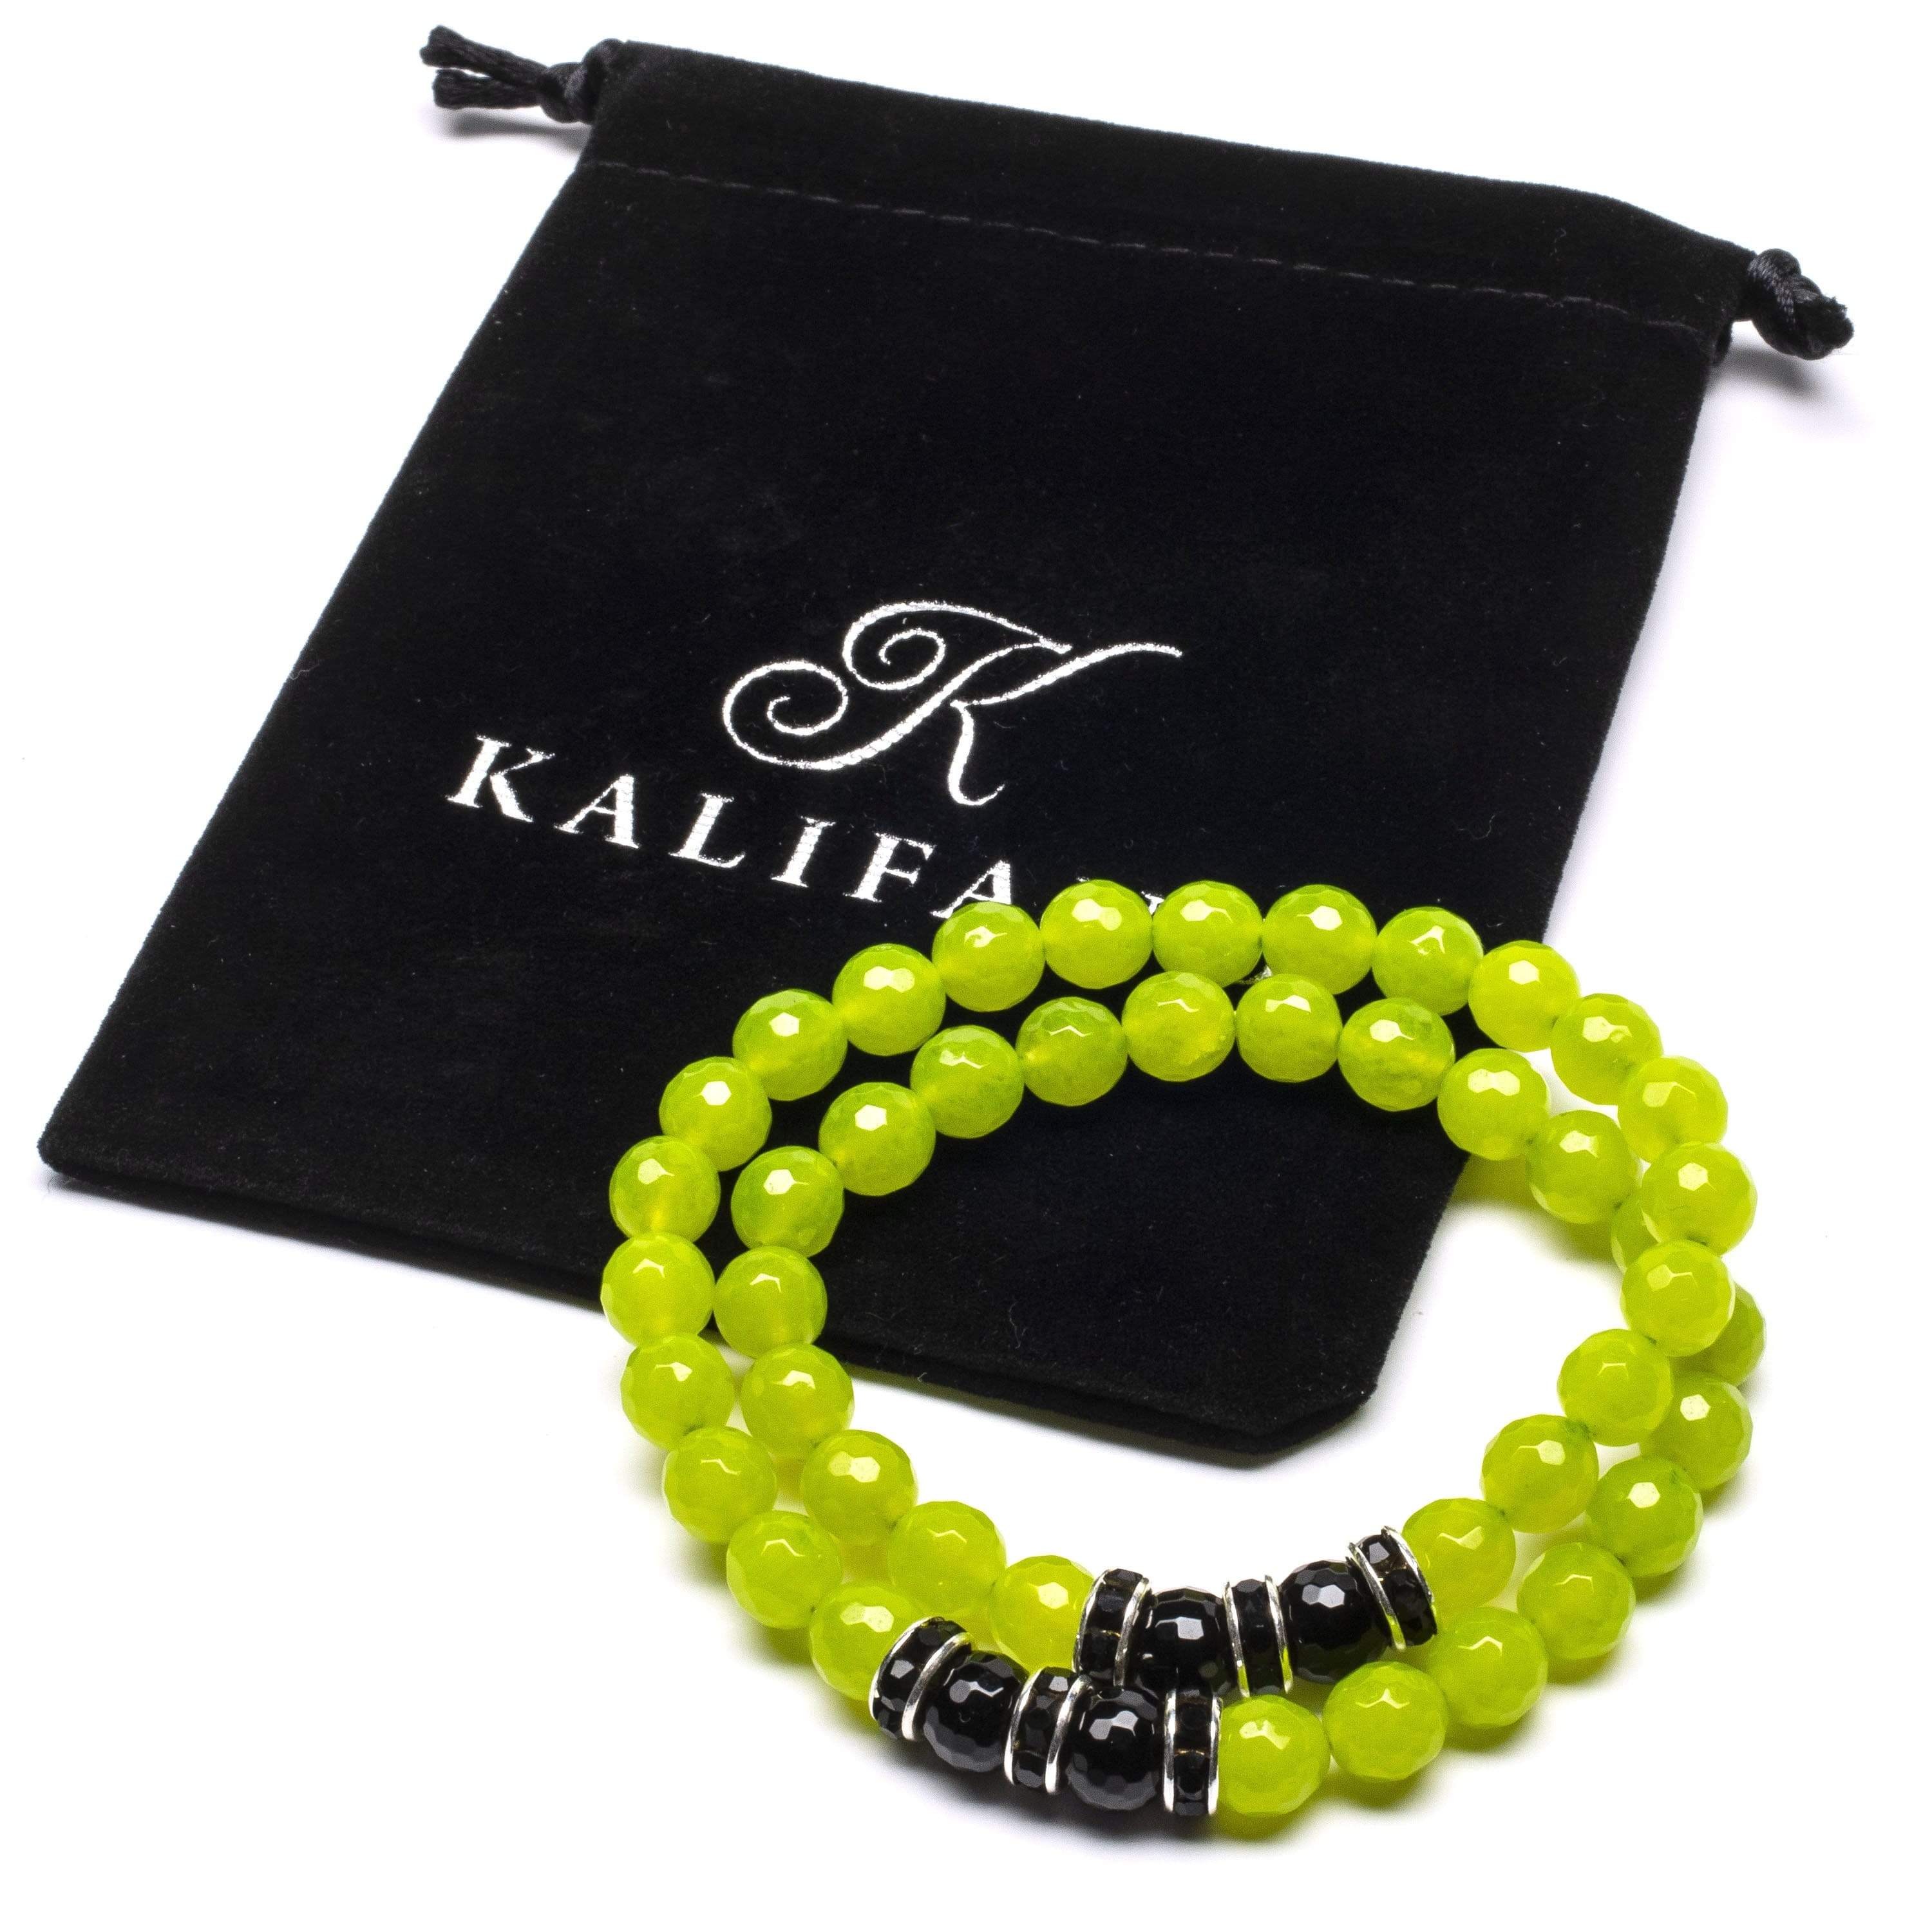 Kalifano Gemstone Bracelets Faceted Bright Green Agate 8mm Beads with Black Agate and Black and Silver Accent Beads Double Wrap Elastic Gemstone Bracelet WHITE-BGI2-019